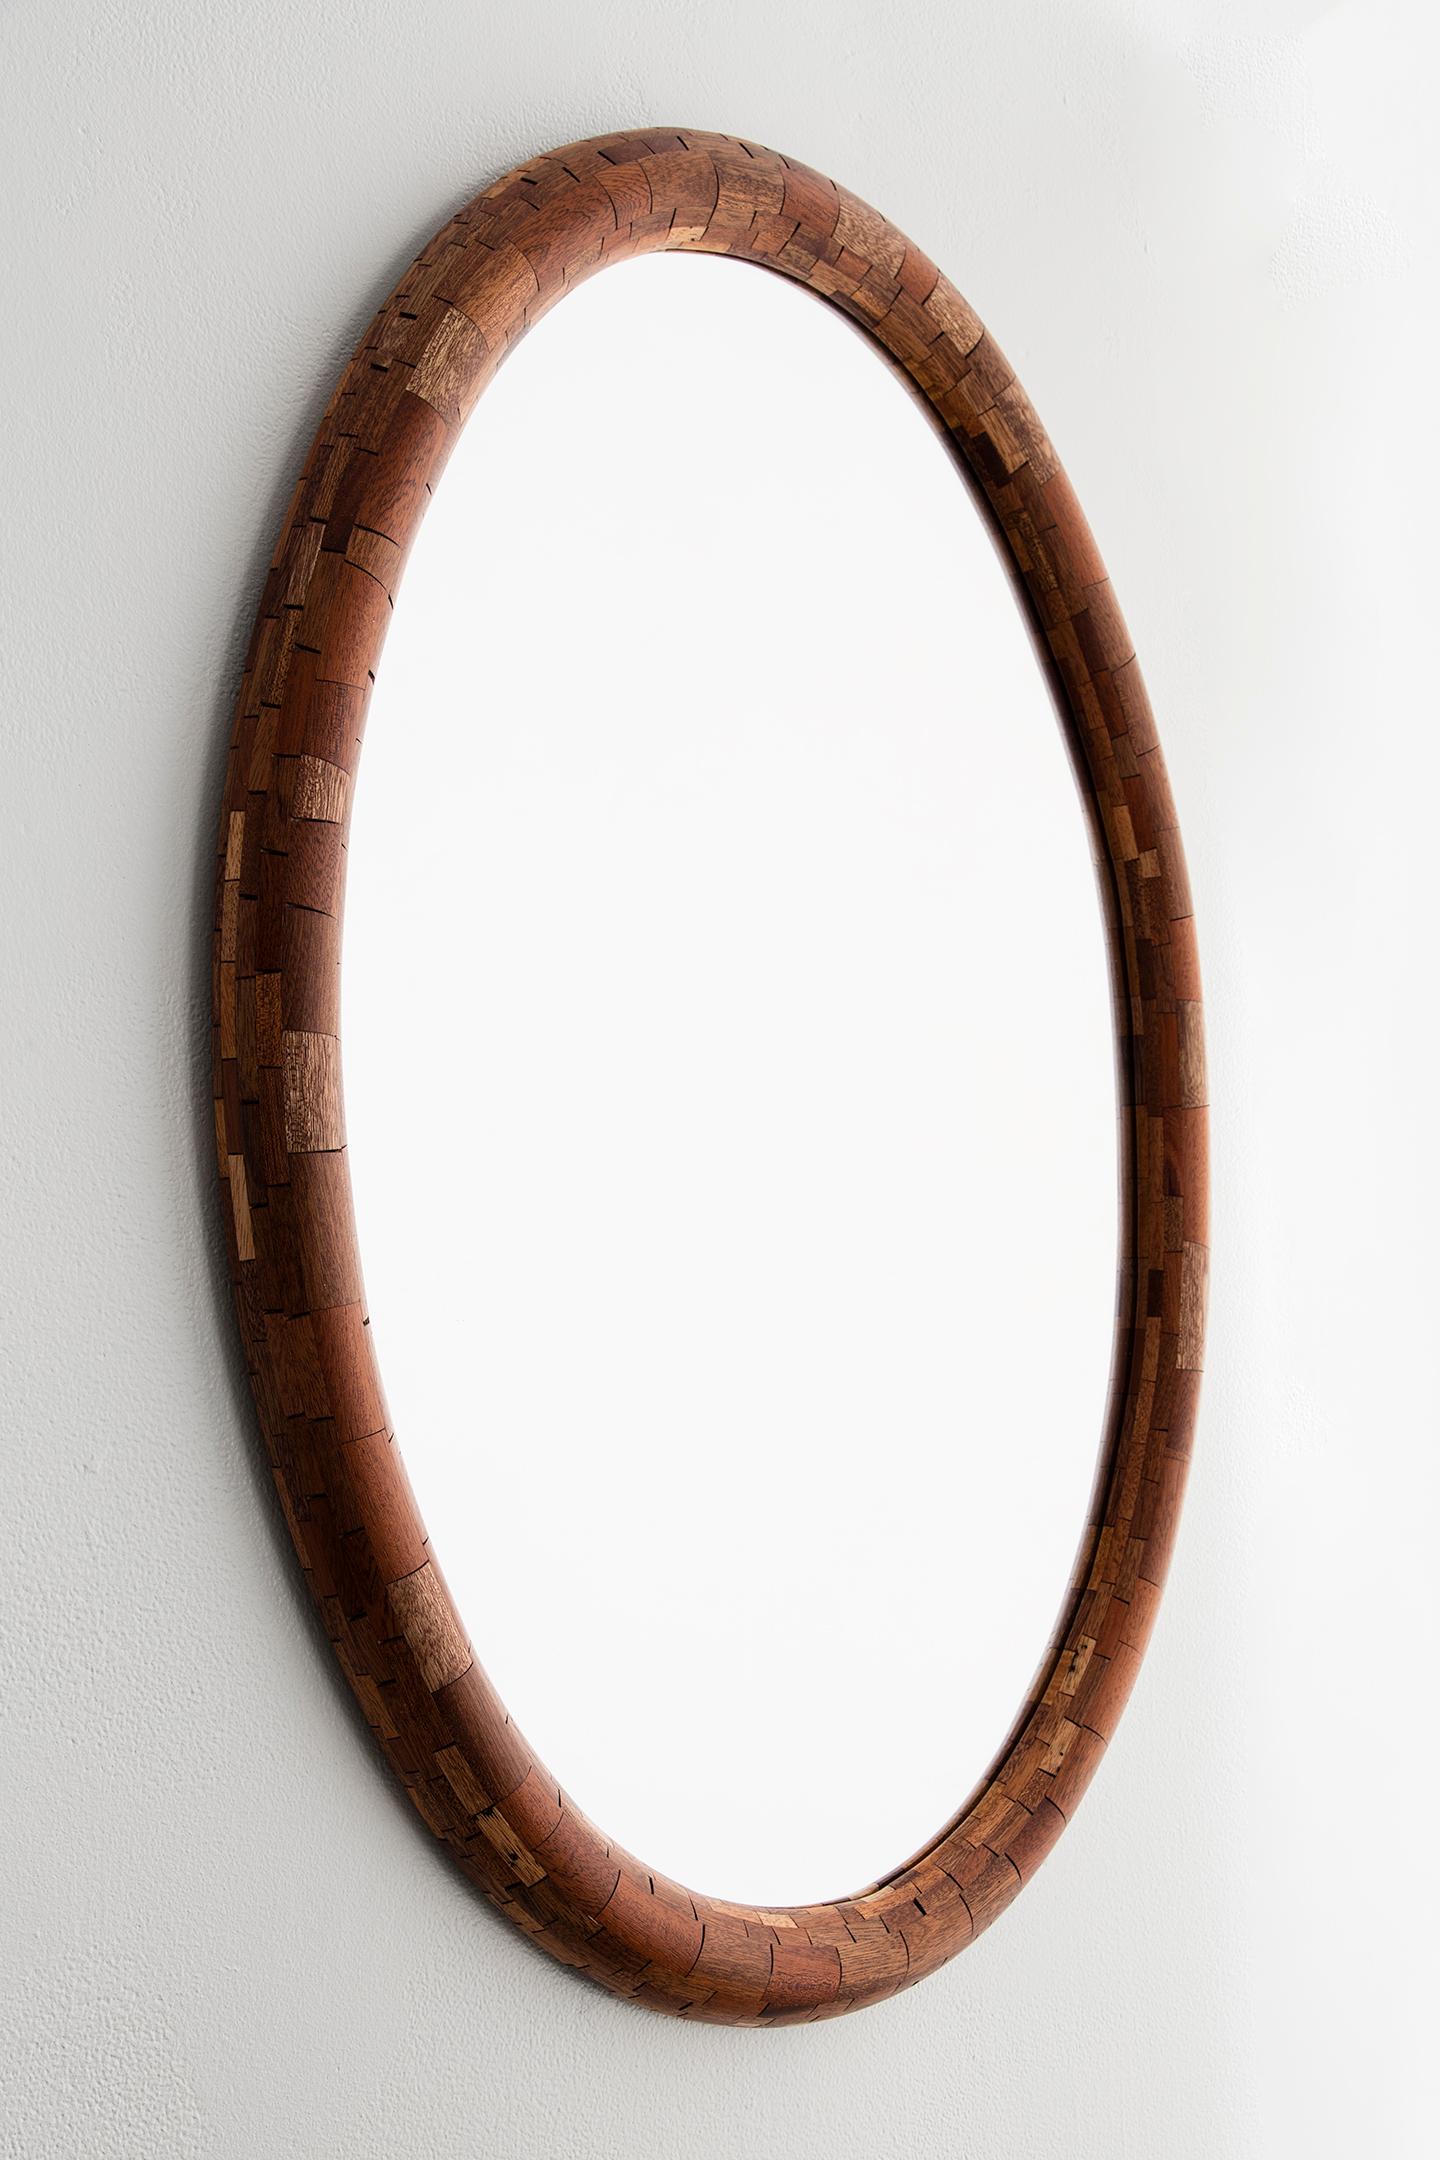 Pressed Customizable STACKED Wooden Oval Mirror by Richard Haining, shown in Walnut For Sale